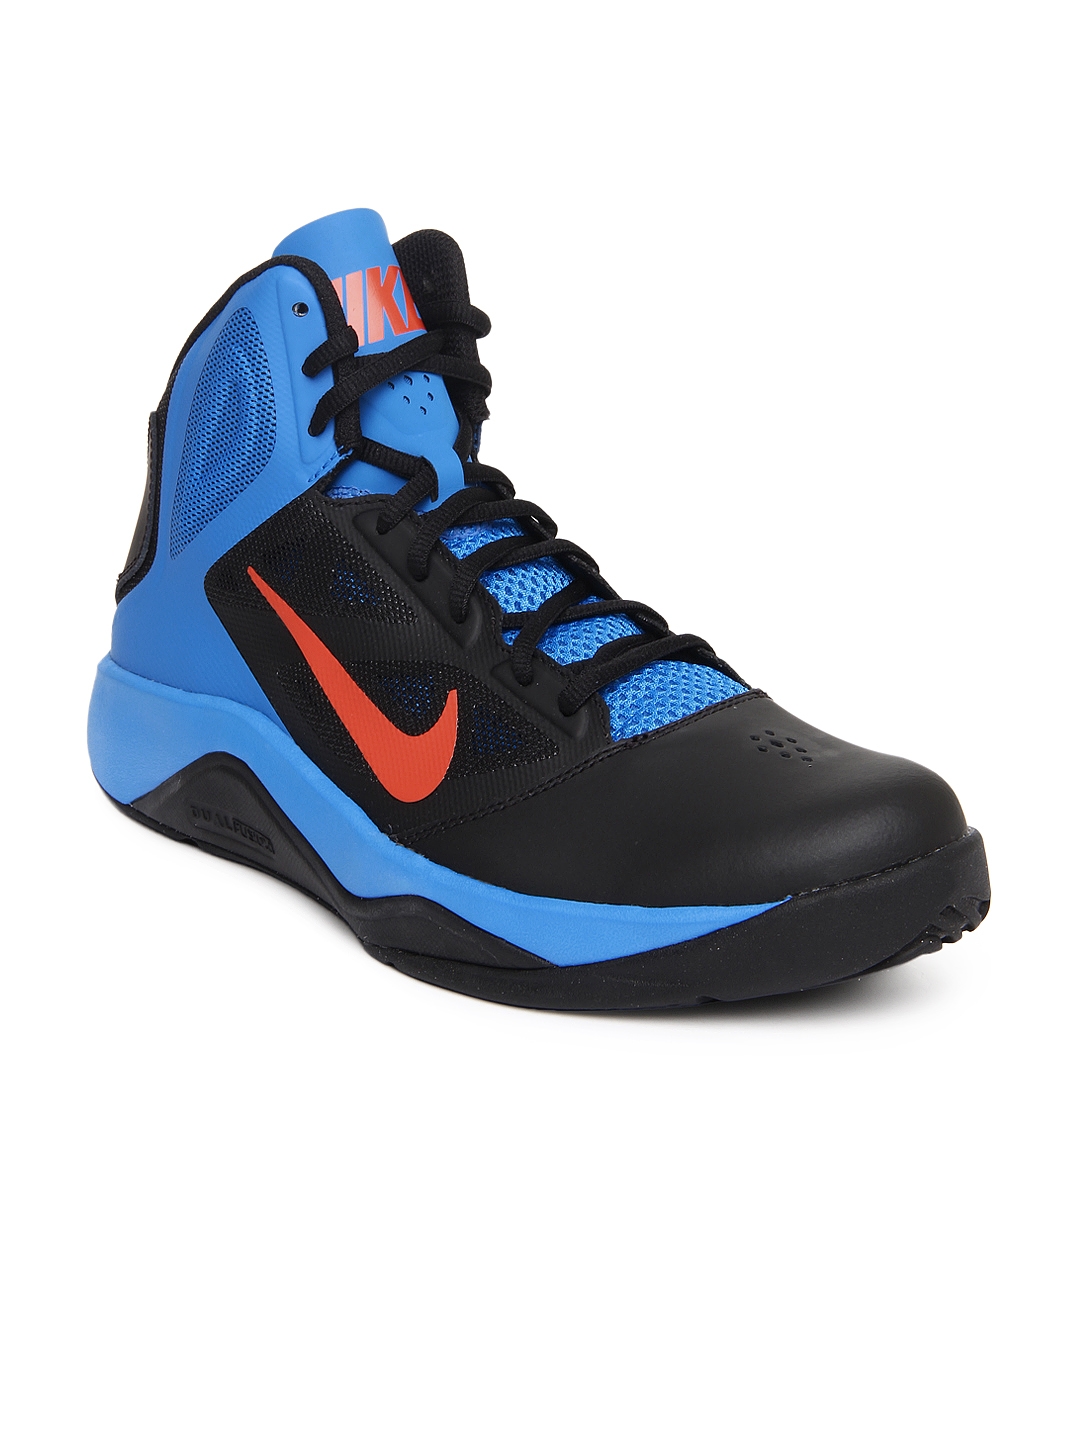 Update more than 169 nike fusion basketball shoes latest